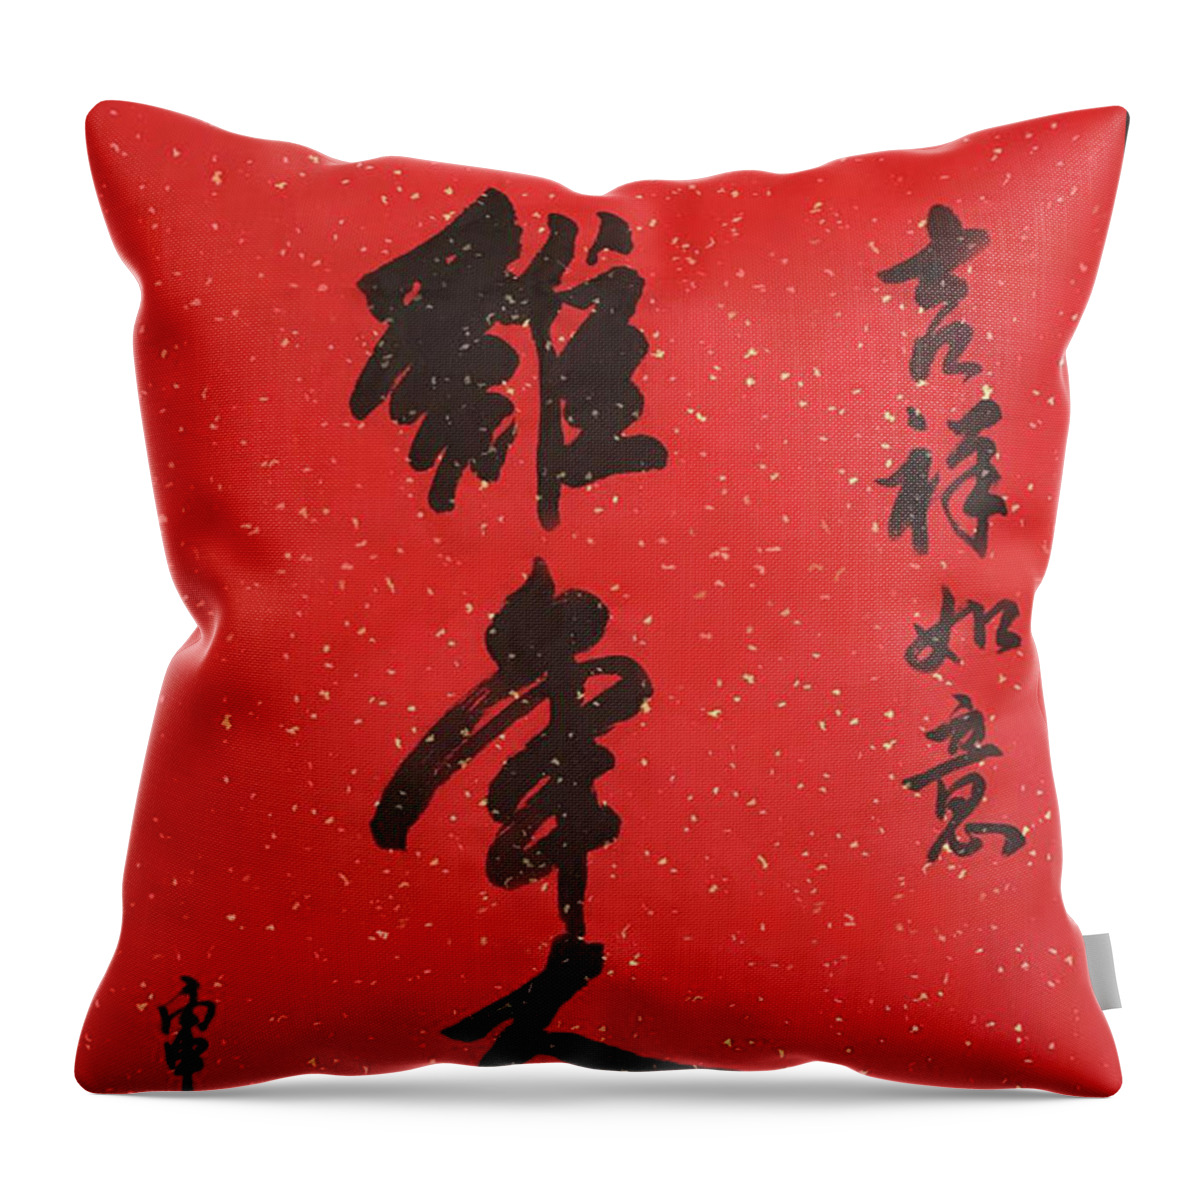 Chinese Zodiac Throw Pillow featuring the painting Good Luck in the Year of the Rooster by Yufeng Wang